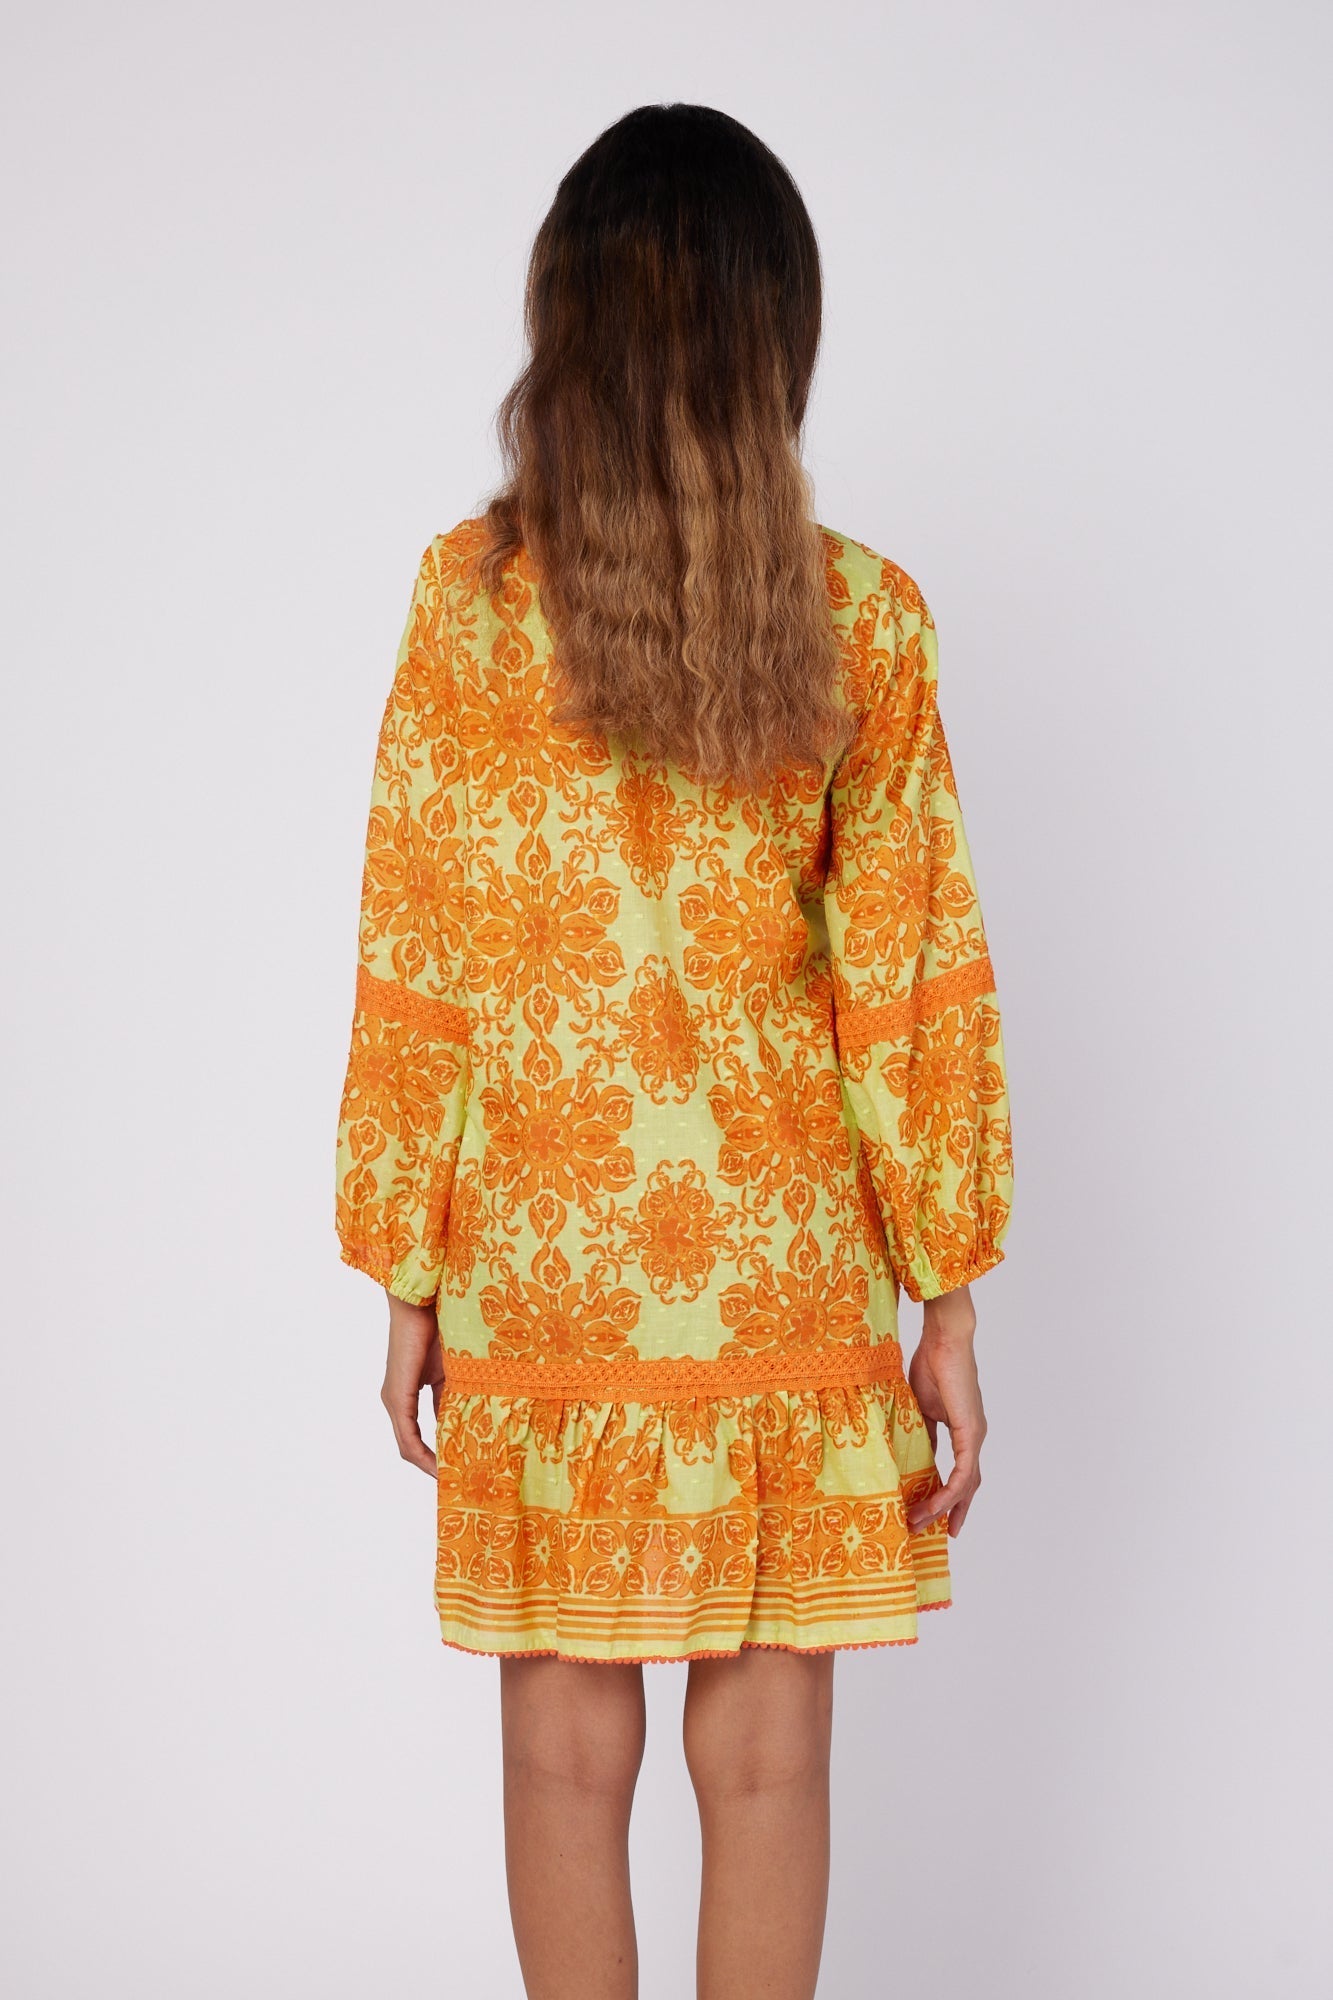 ModaPosa Ilaria Puff Sleeve Drop Waist Hand Embroidered Knee Length Dress with Lace Trim in Curacao Majolica . Discover women's resort dresses and lifestyle clothing inspired by the Mediterranean. Free worldwide shipping available!